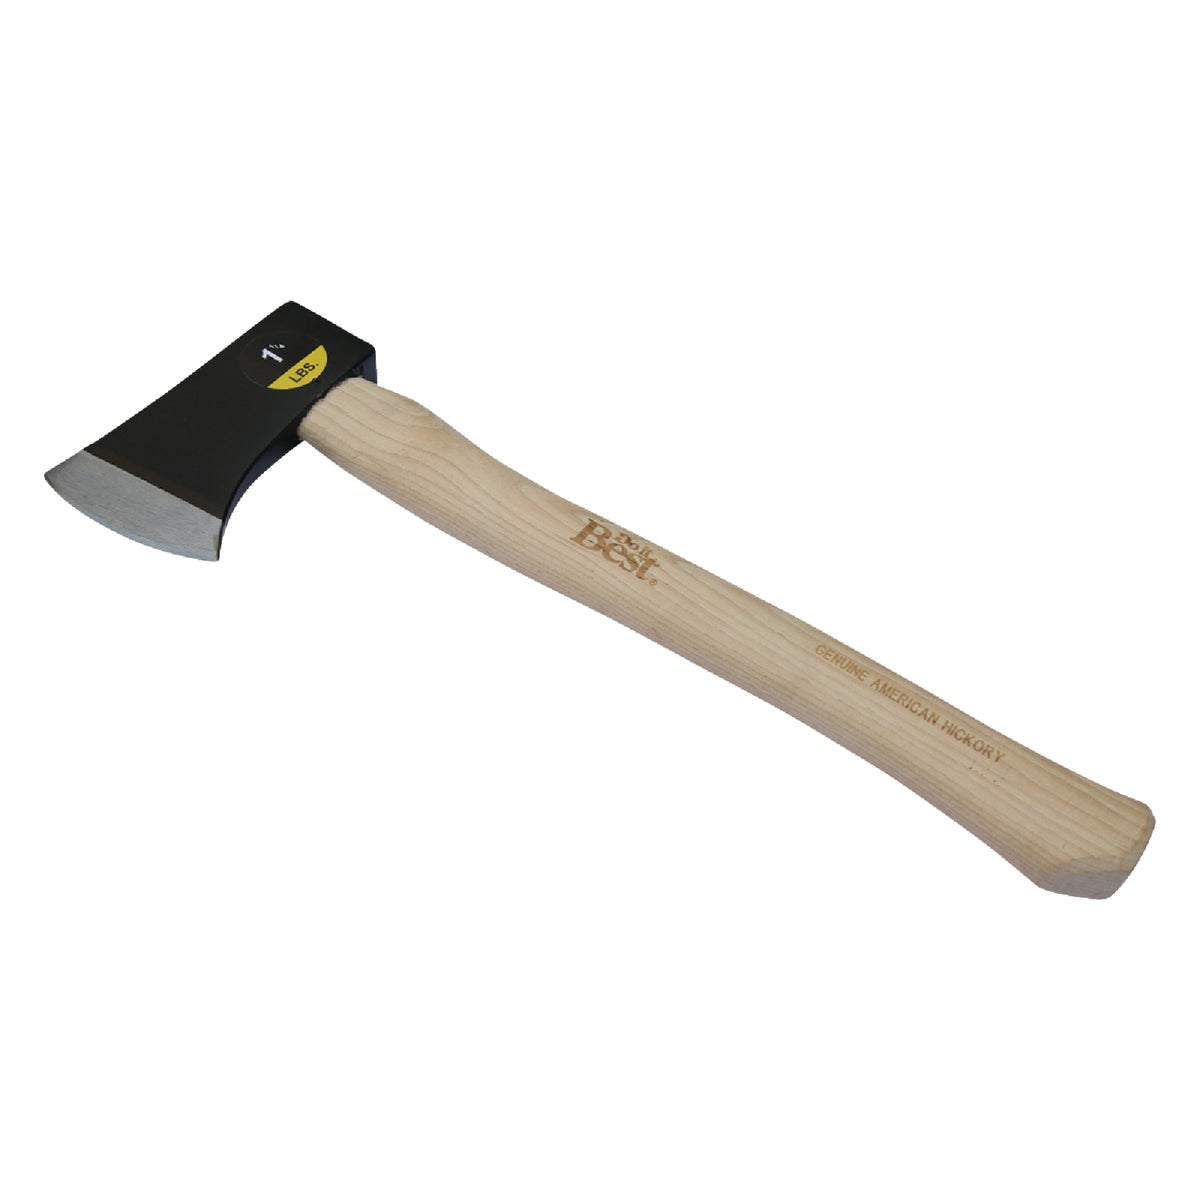 SIM Supply, Inc. 30514 Do it Best 14 In. L. 1-1/4 Lb. Head Hickory Wood Handle Camper Axe 30514